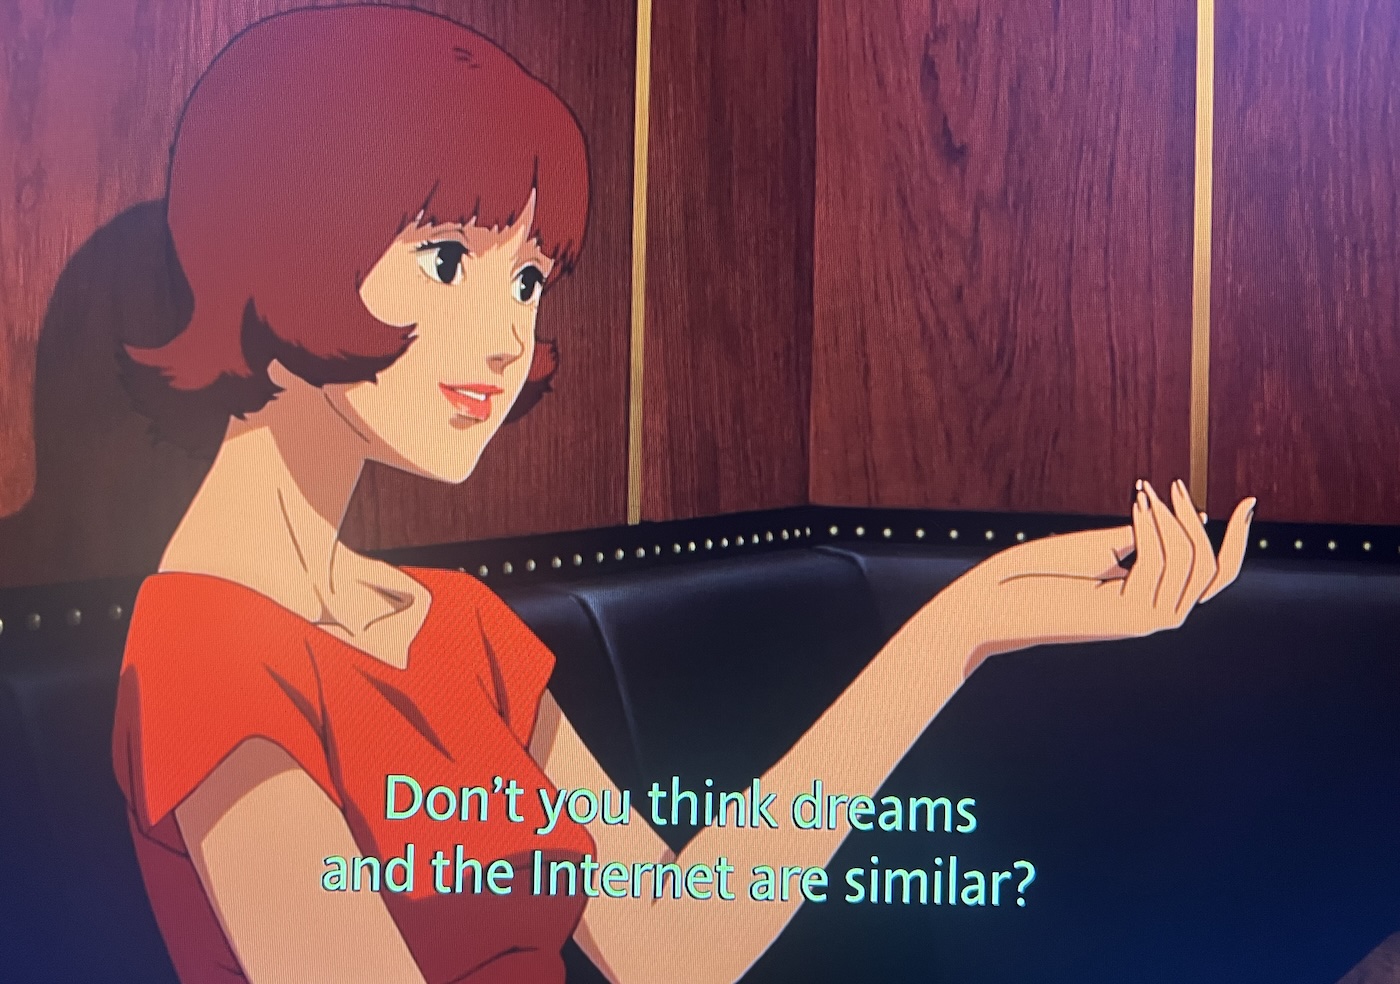 A girl sitting at a table with her hand in the air, drawn in the style of manga. The caption reads 'Don't you think dreams and the internet are similar?'